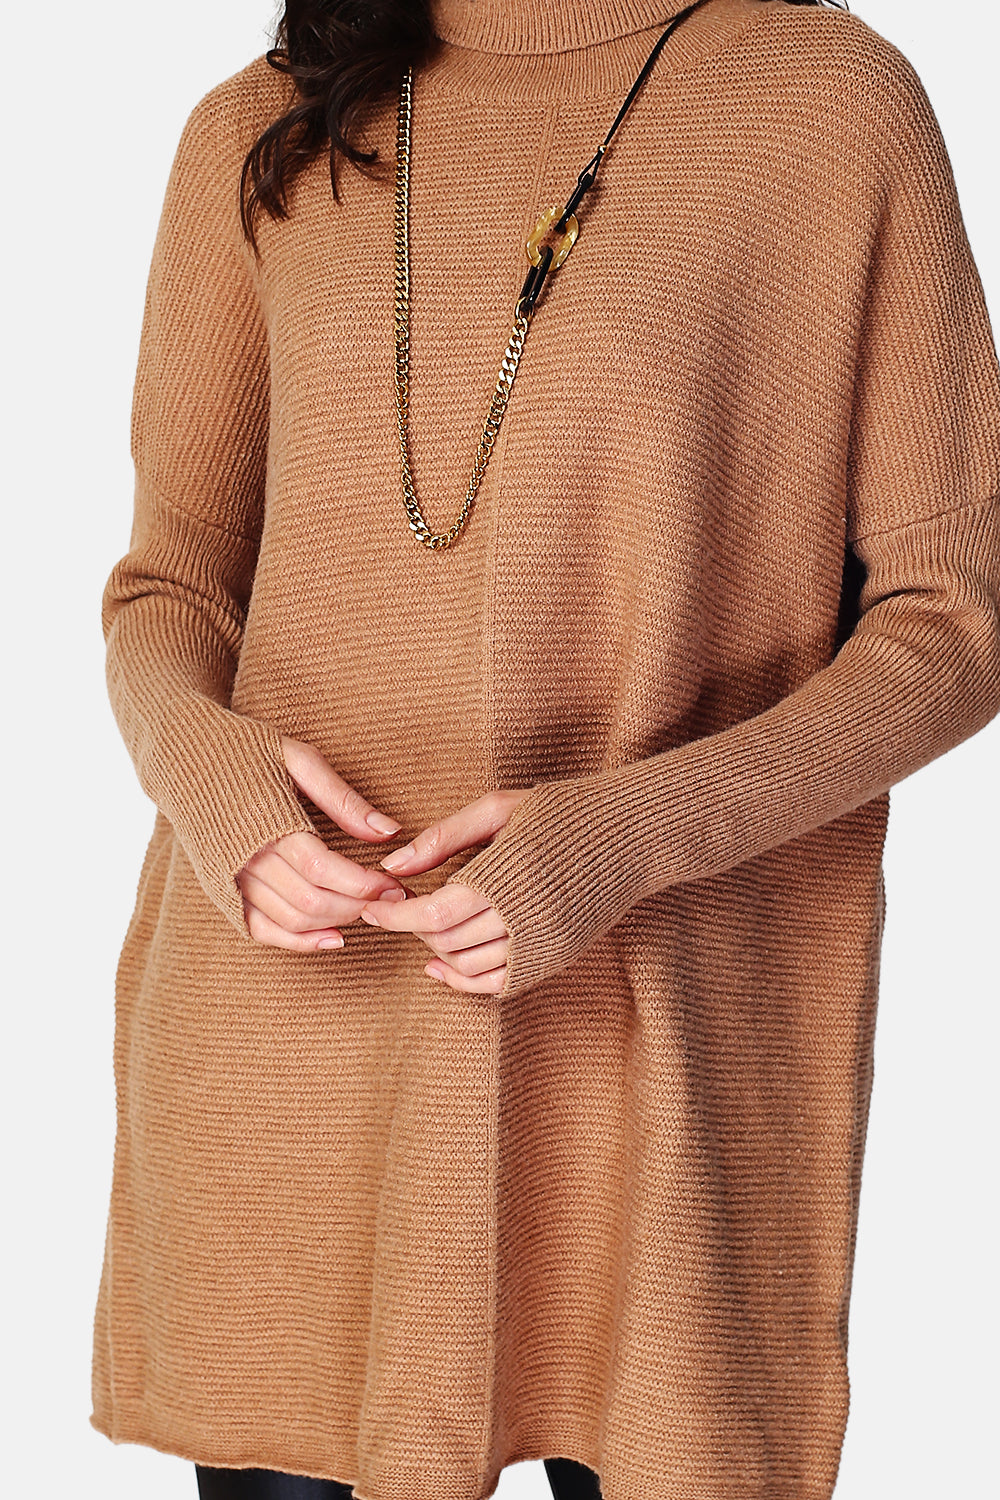 Asymmetrical turtleneck dress in English rib with long sleeves